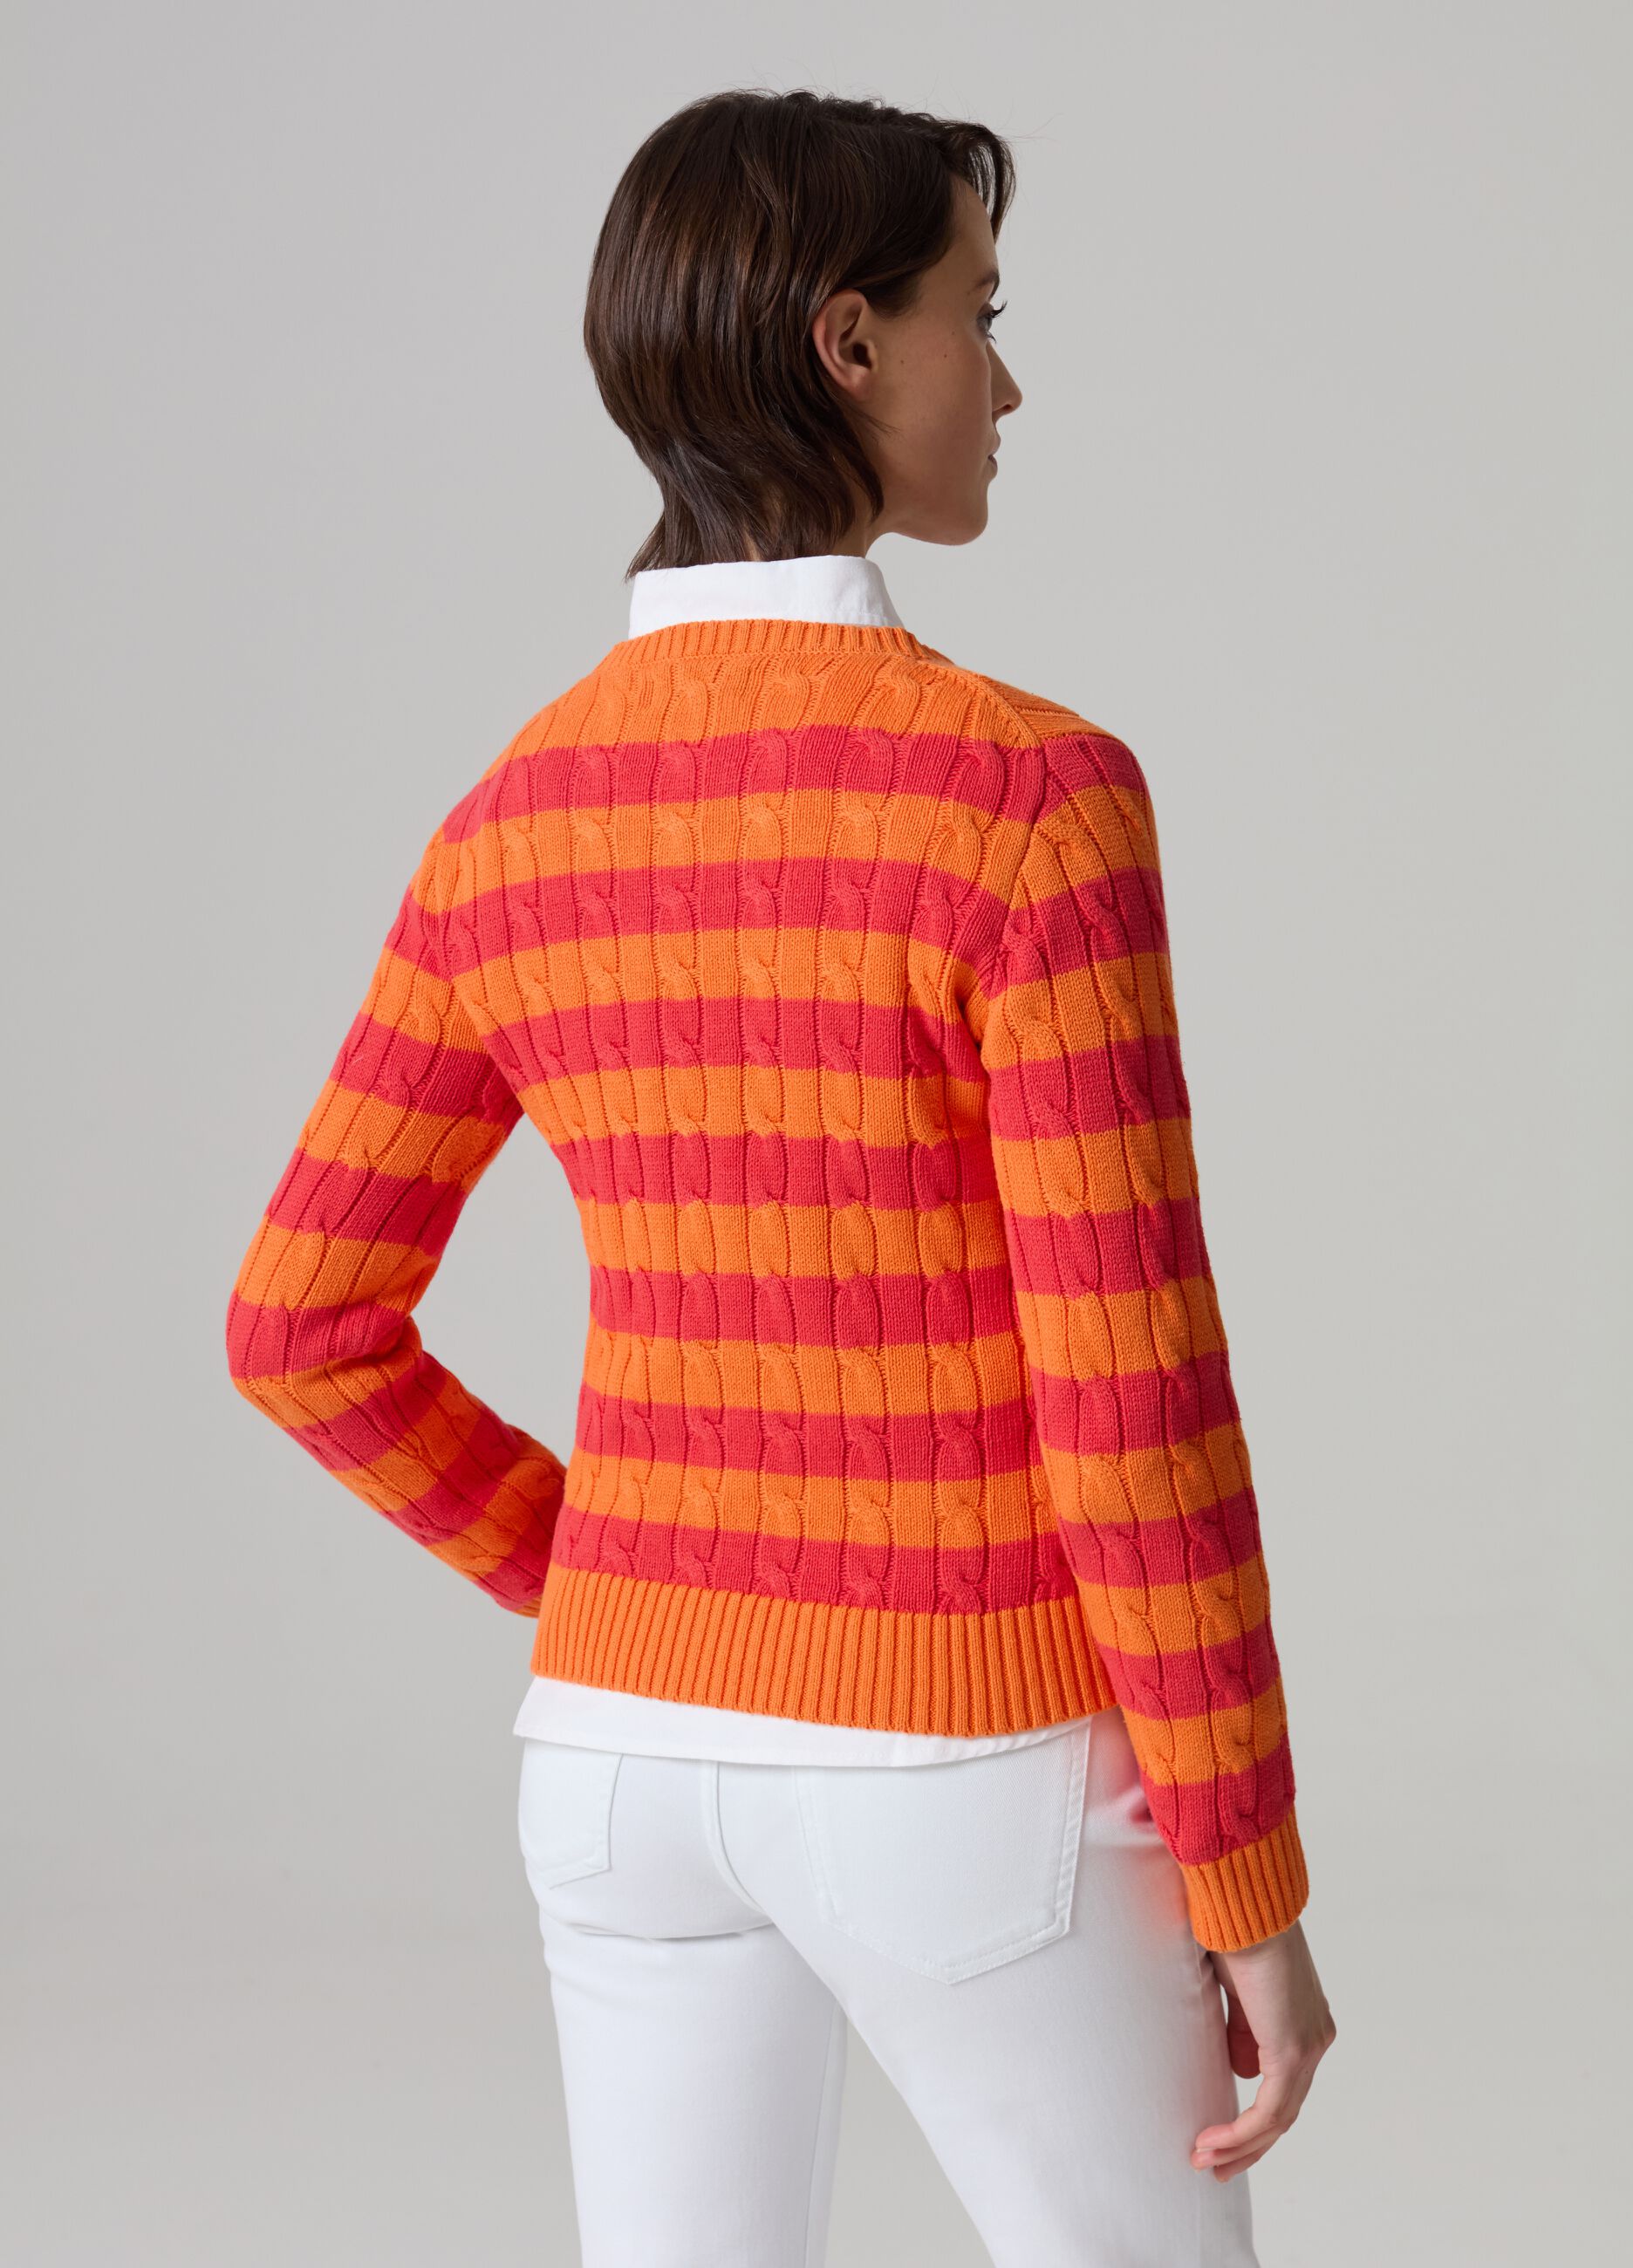 Striped pullover with braided design